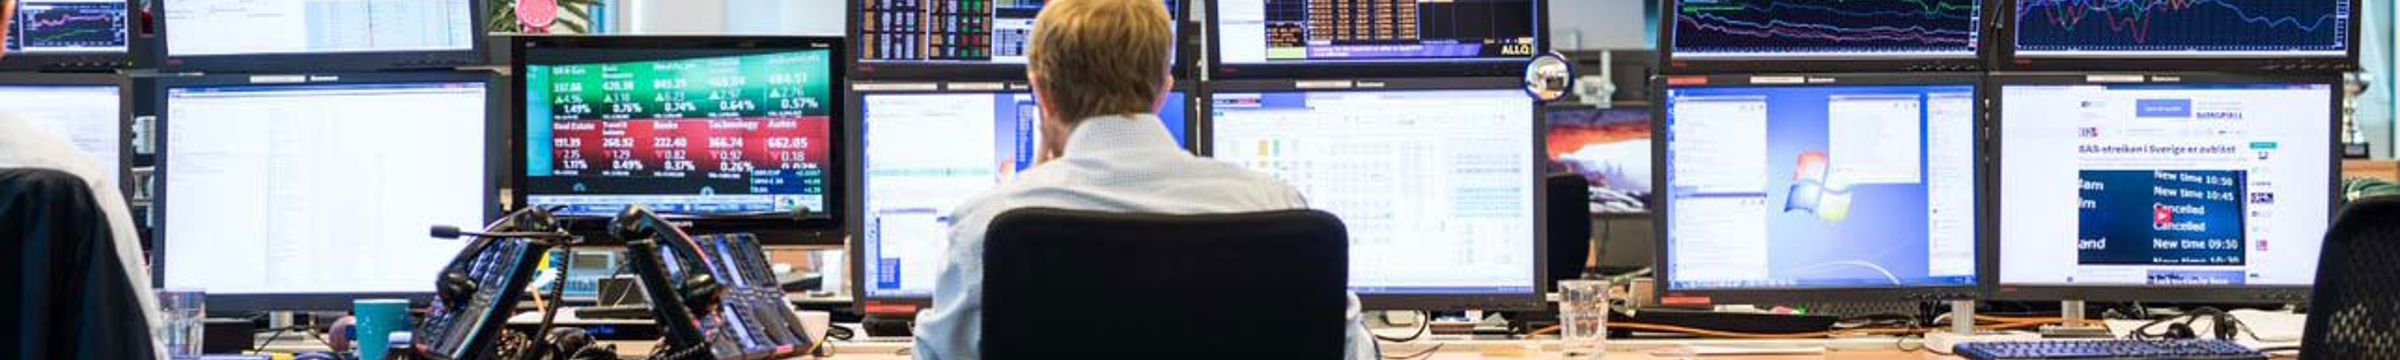 Man sitting in front of an energy hedging desk